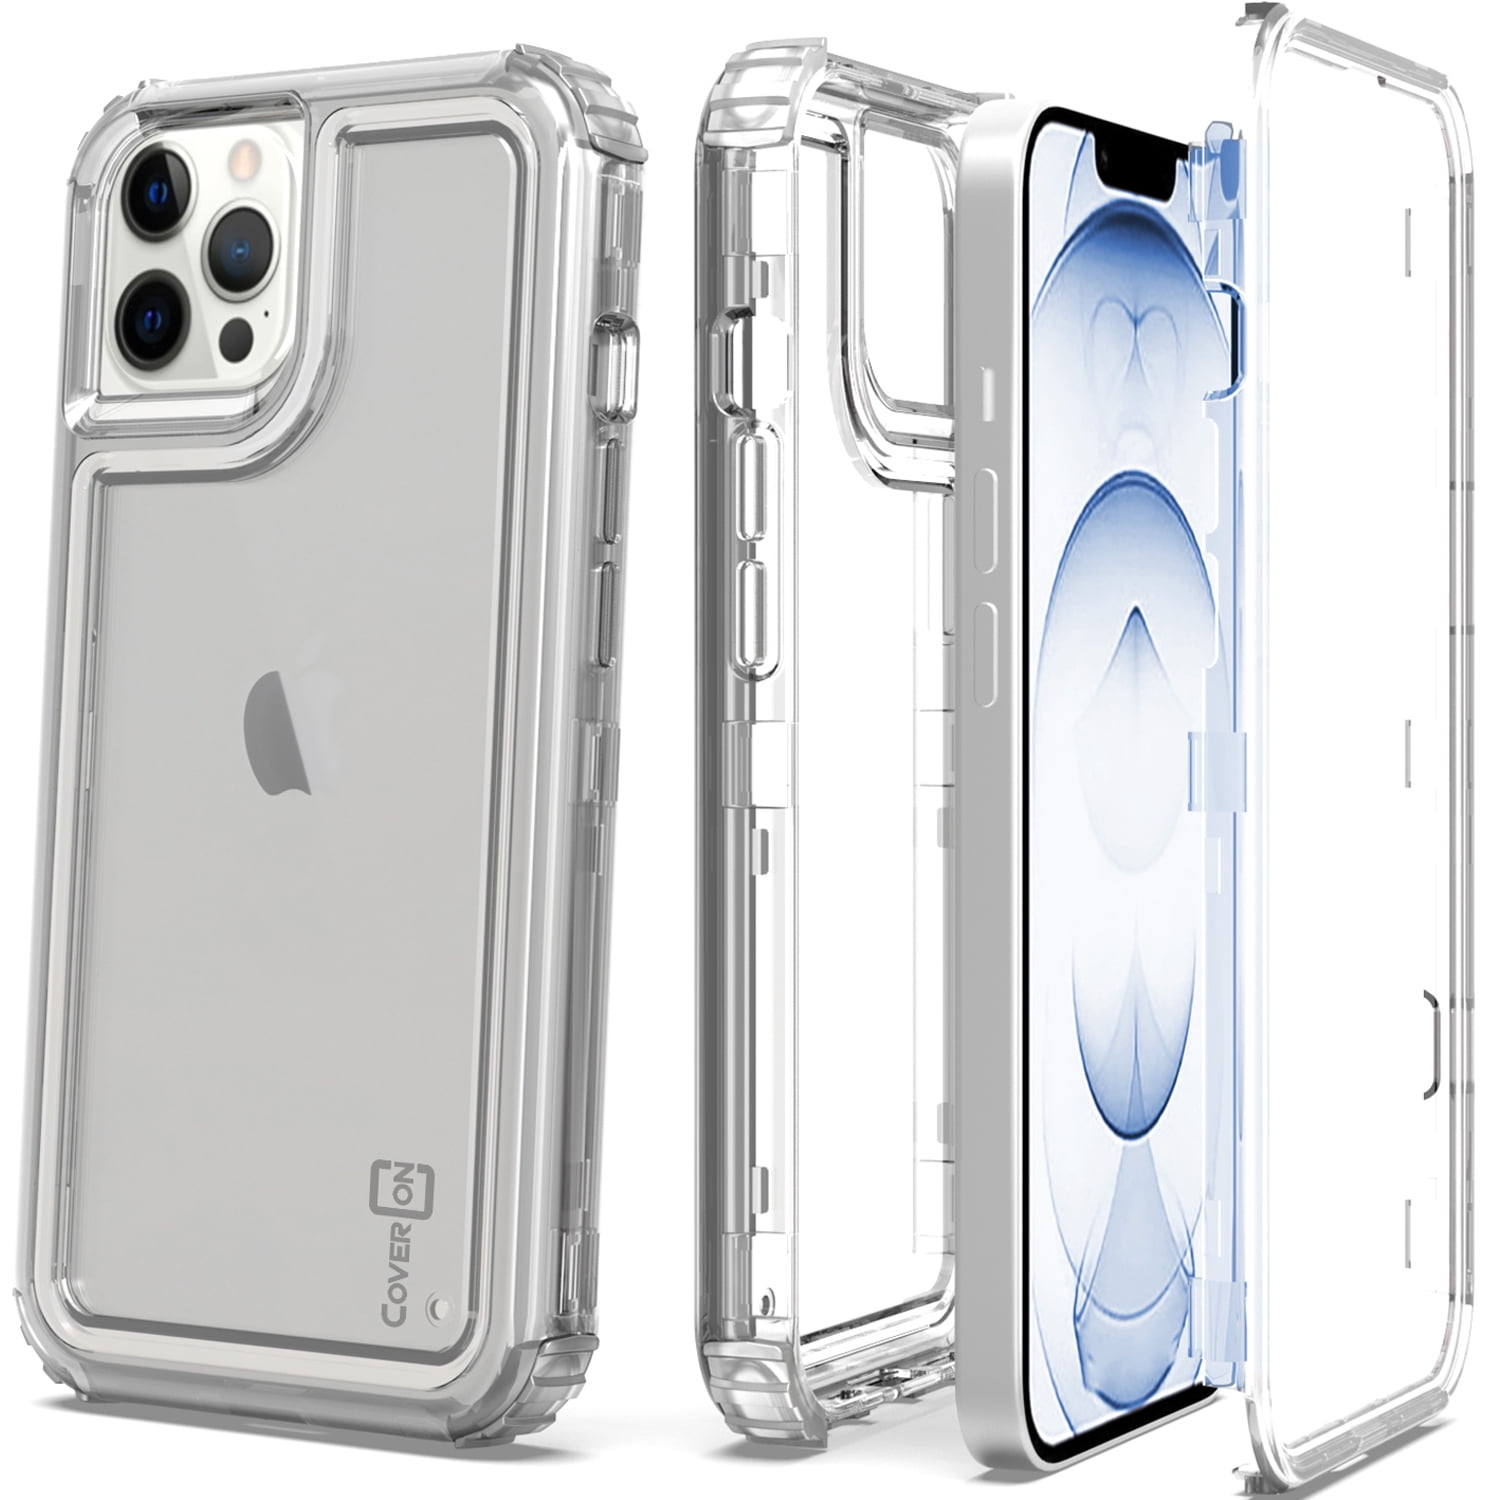 Coveron For Apple Iphone 13 Pro Max Case Military Grade Heavy Duty Full Body 3 Layer Shockproof Phone Cover Clear Walmart Com